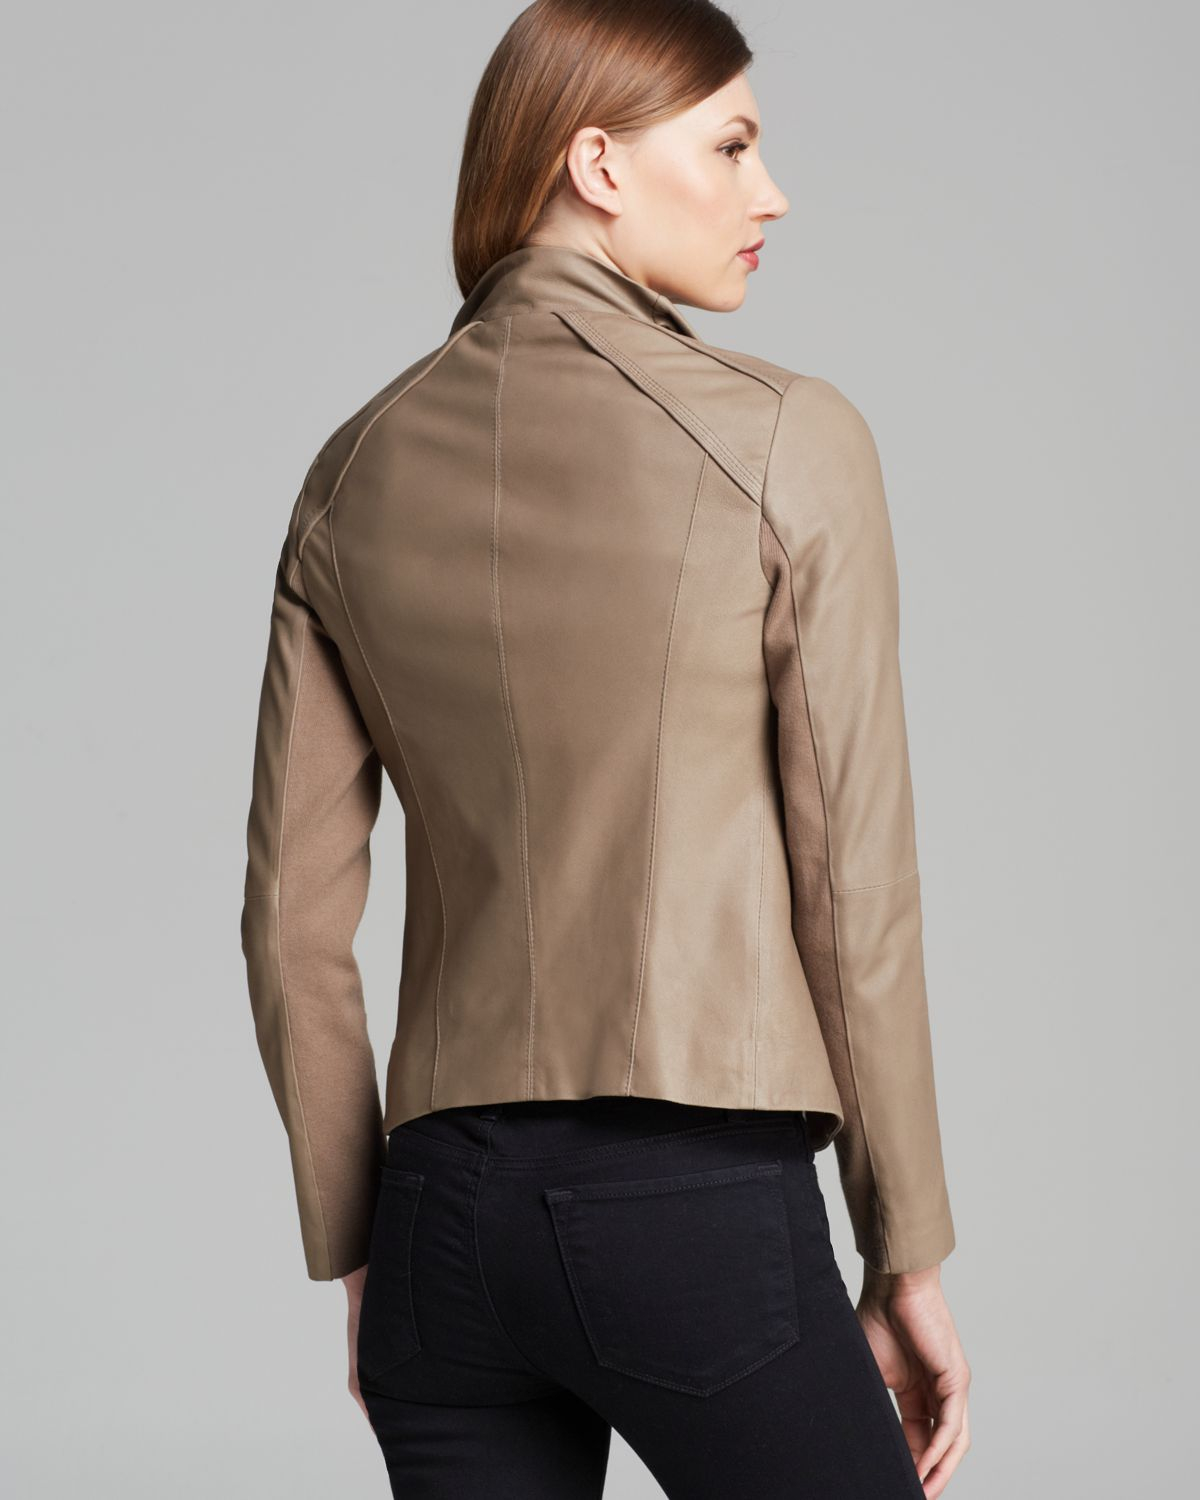 Lyst - Elie Tahari Jacket - Andreas Drape Front Leather in Gray